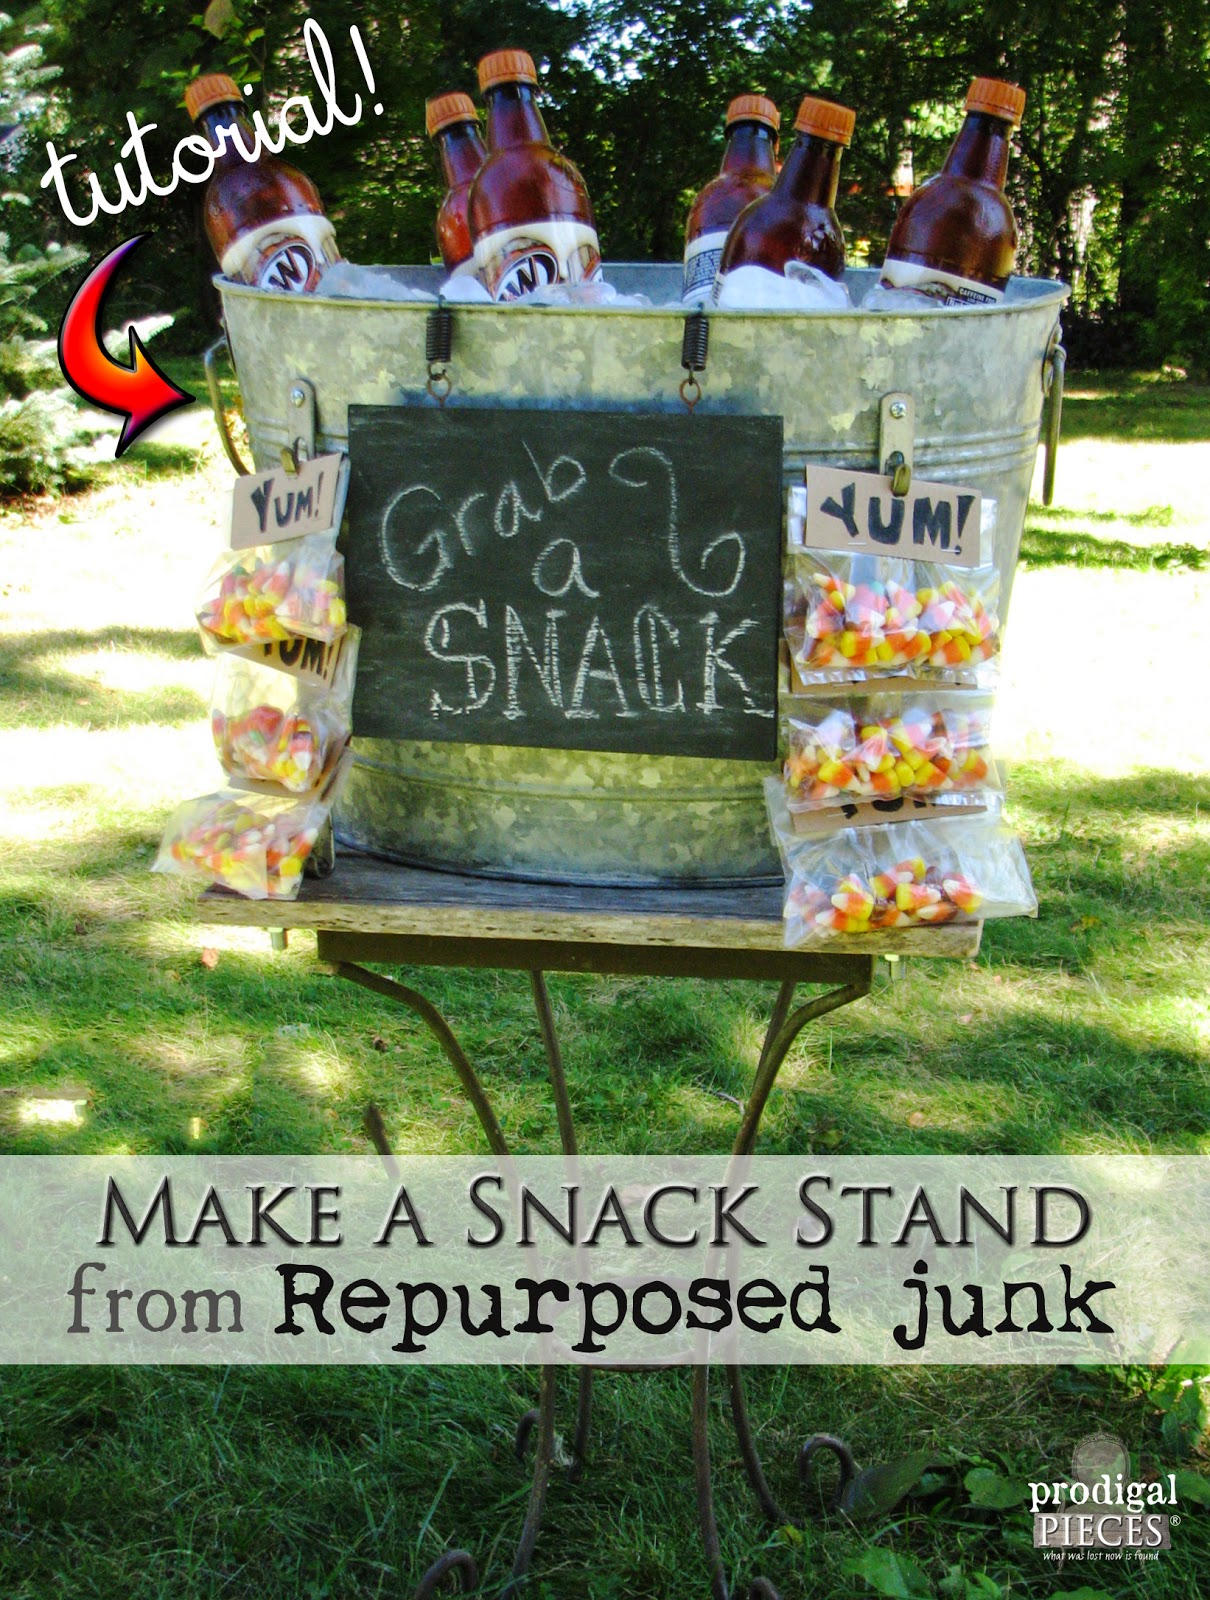 DIY Repurposed Snack & Beverage Stand Tutorial by Prodigal Pieces | prodigalpieces.com